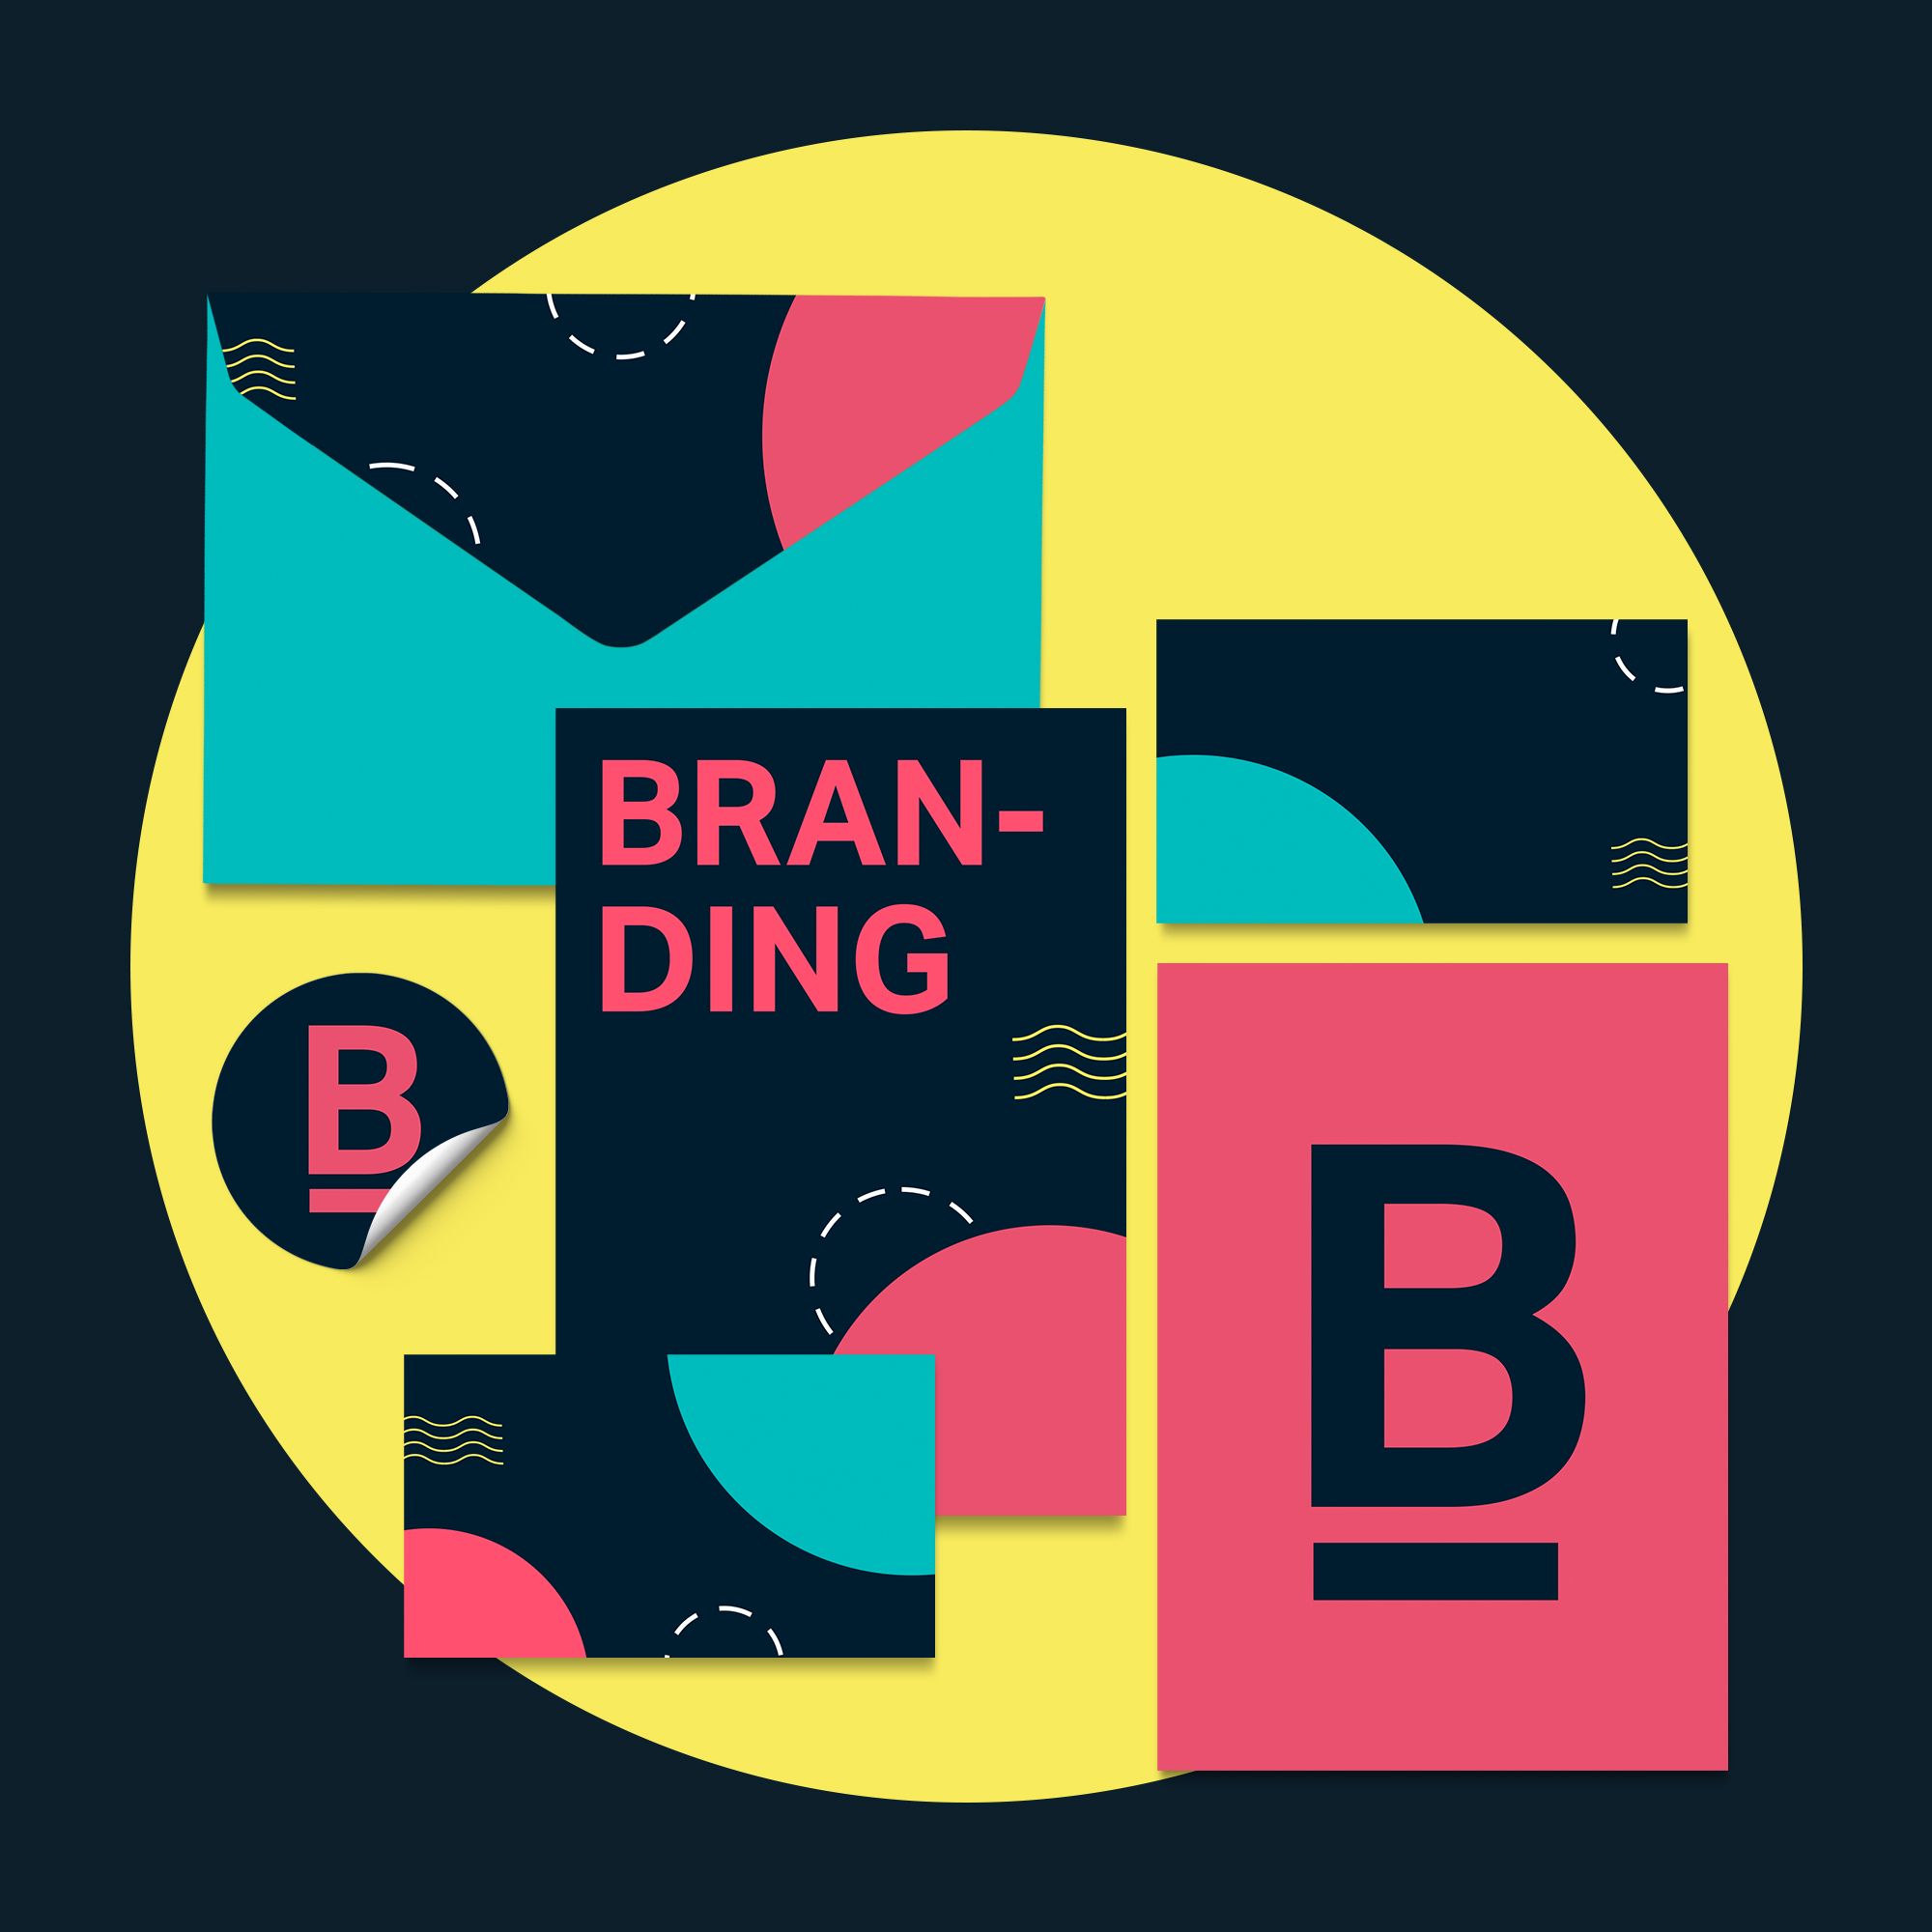 The importance of having a branding in your company